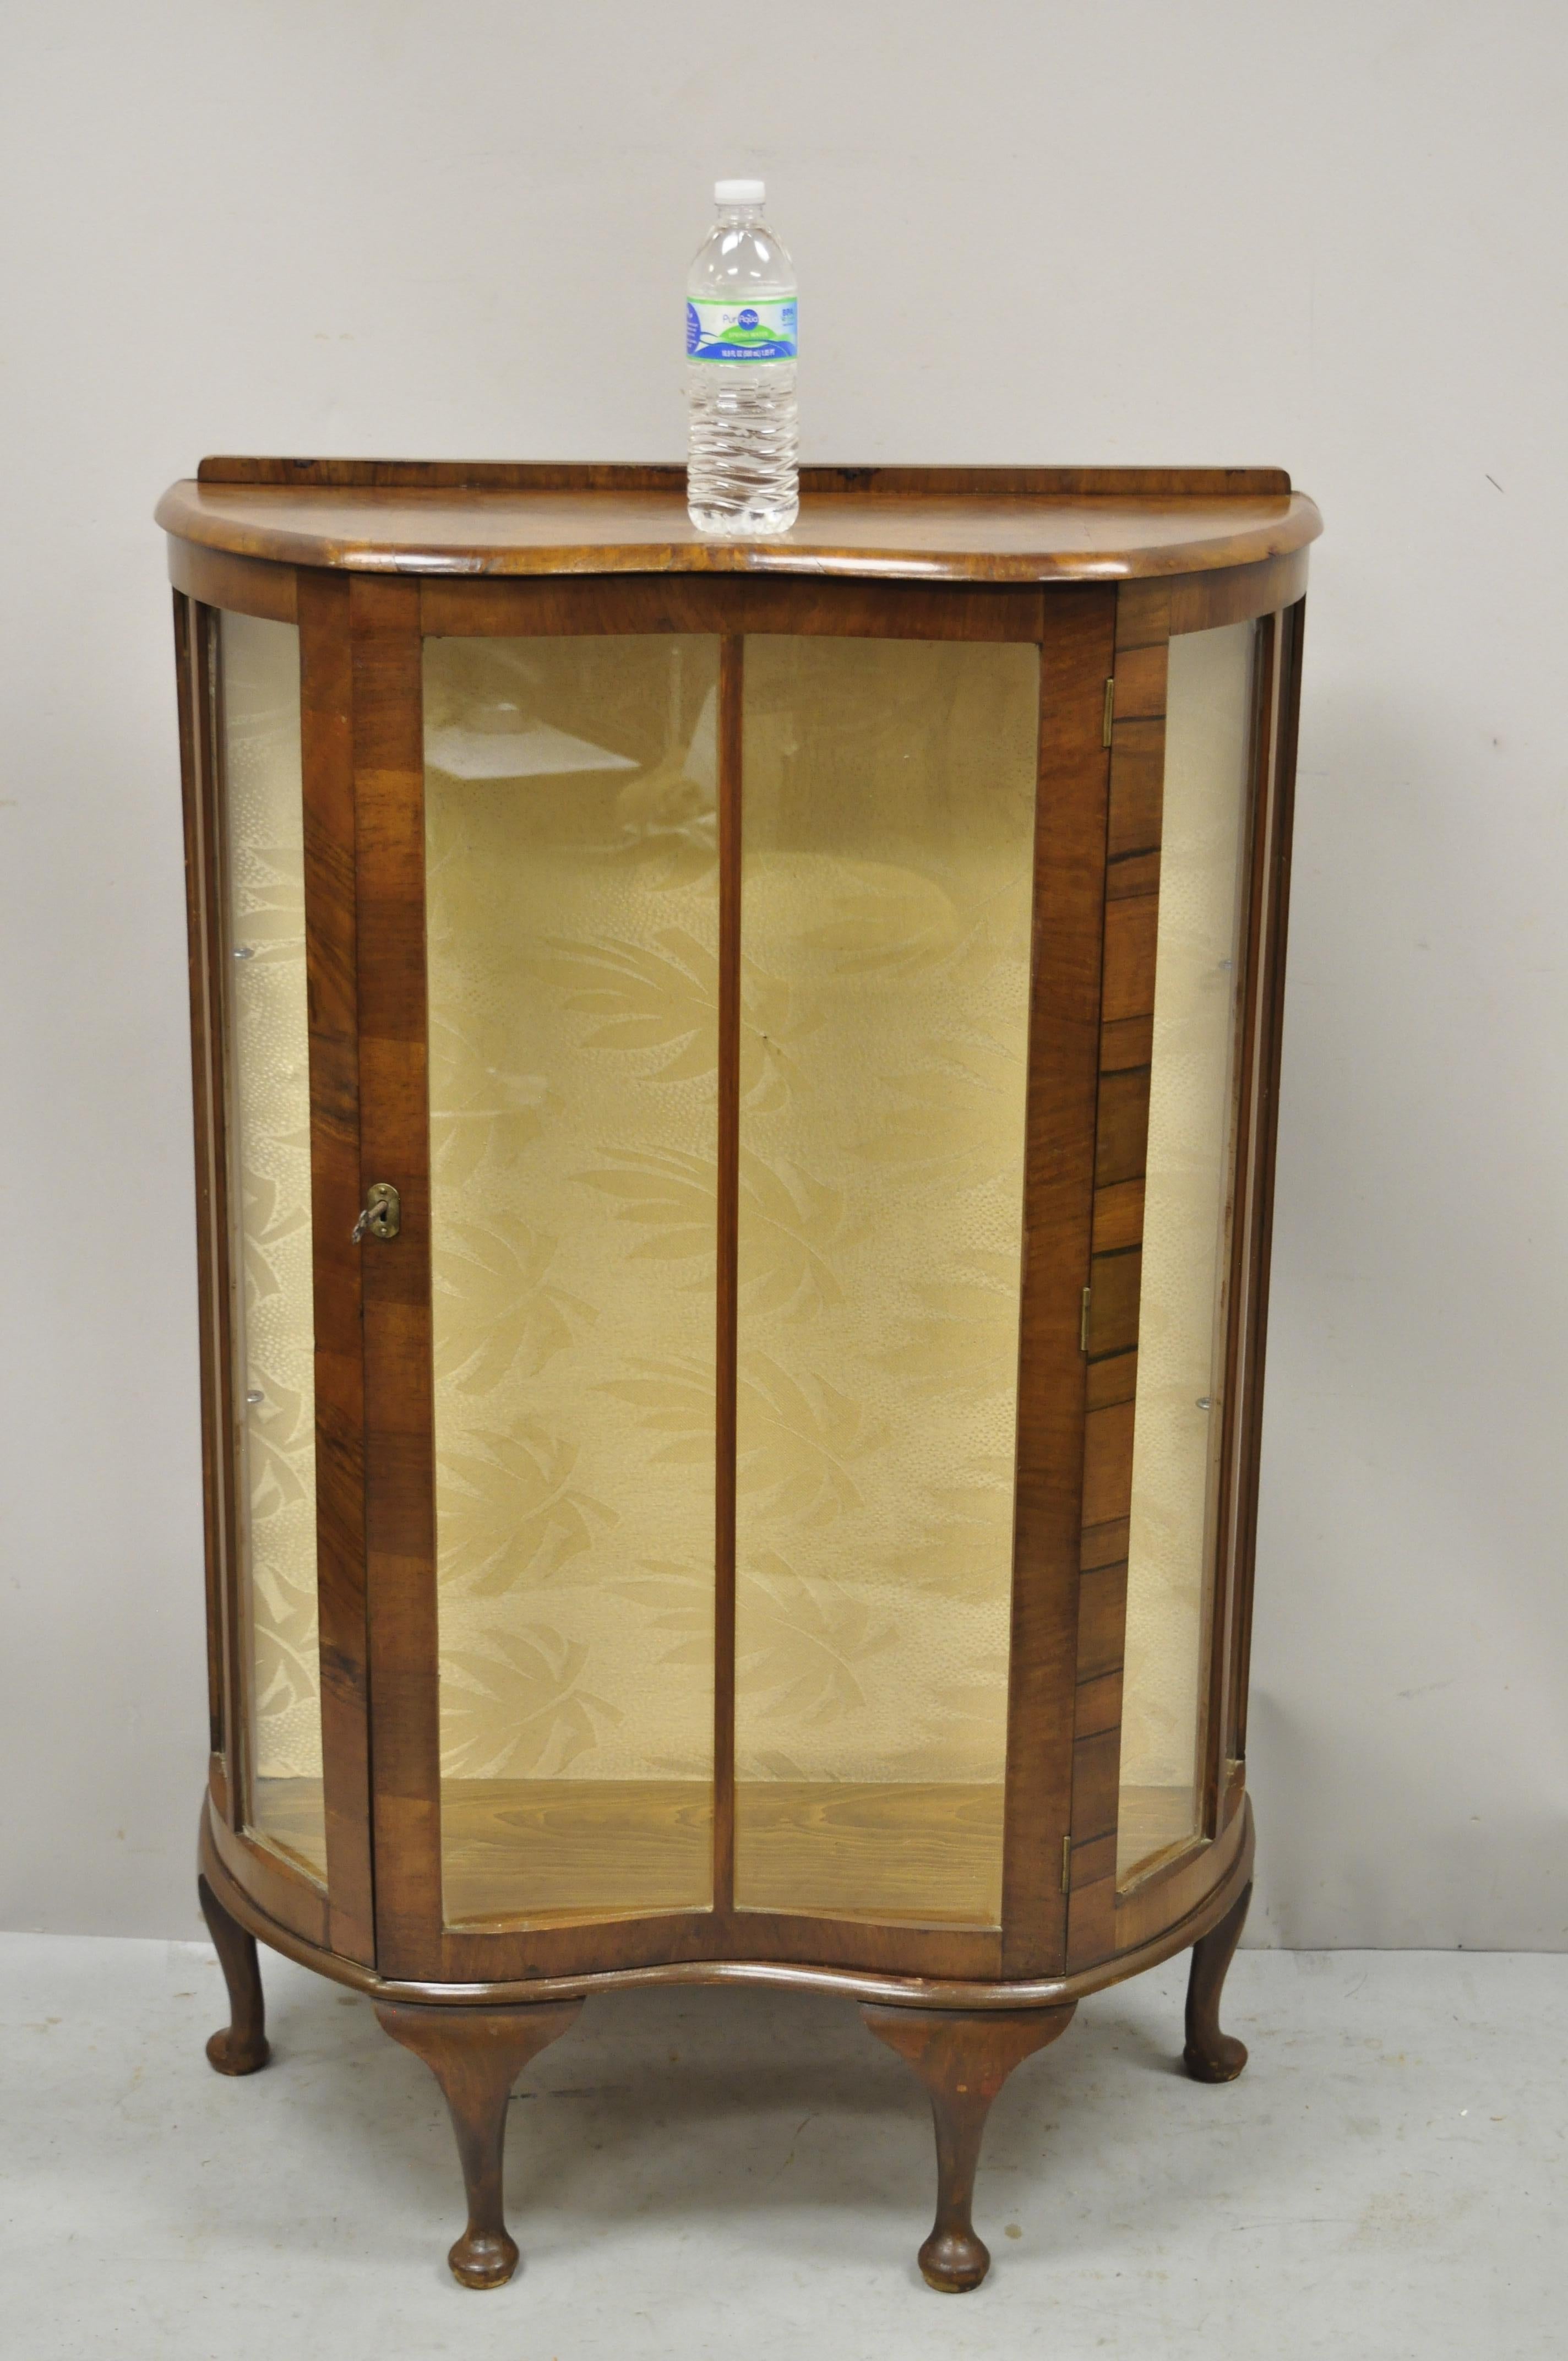 Antique German Art Deco burl walnut zebra wood small glass curio display cabinet. Item features beautiful wood grain, working lock and key, shapely Queen Anne legs, very nice antique item, great style and form. Circa early 1900s. Measurements: 44.5